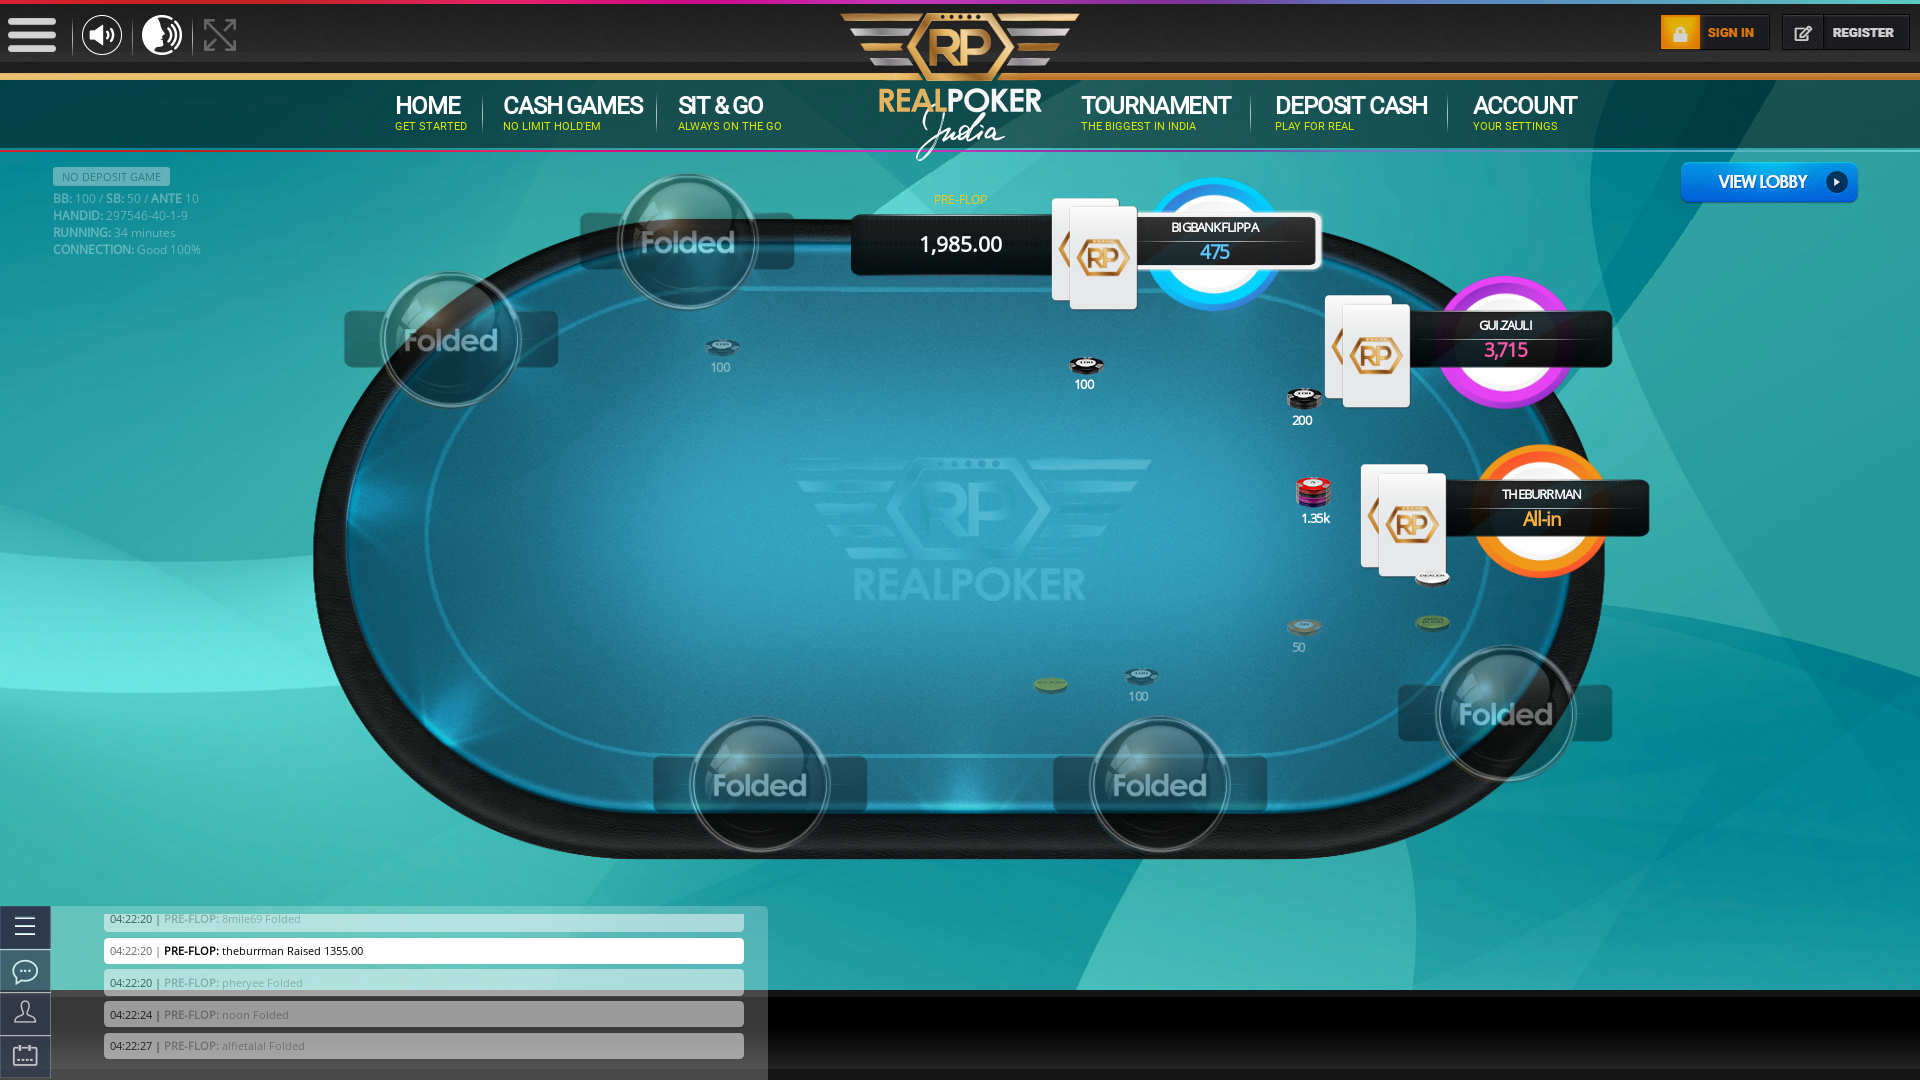 Indian poker on a 10 player table in the 34th minute